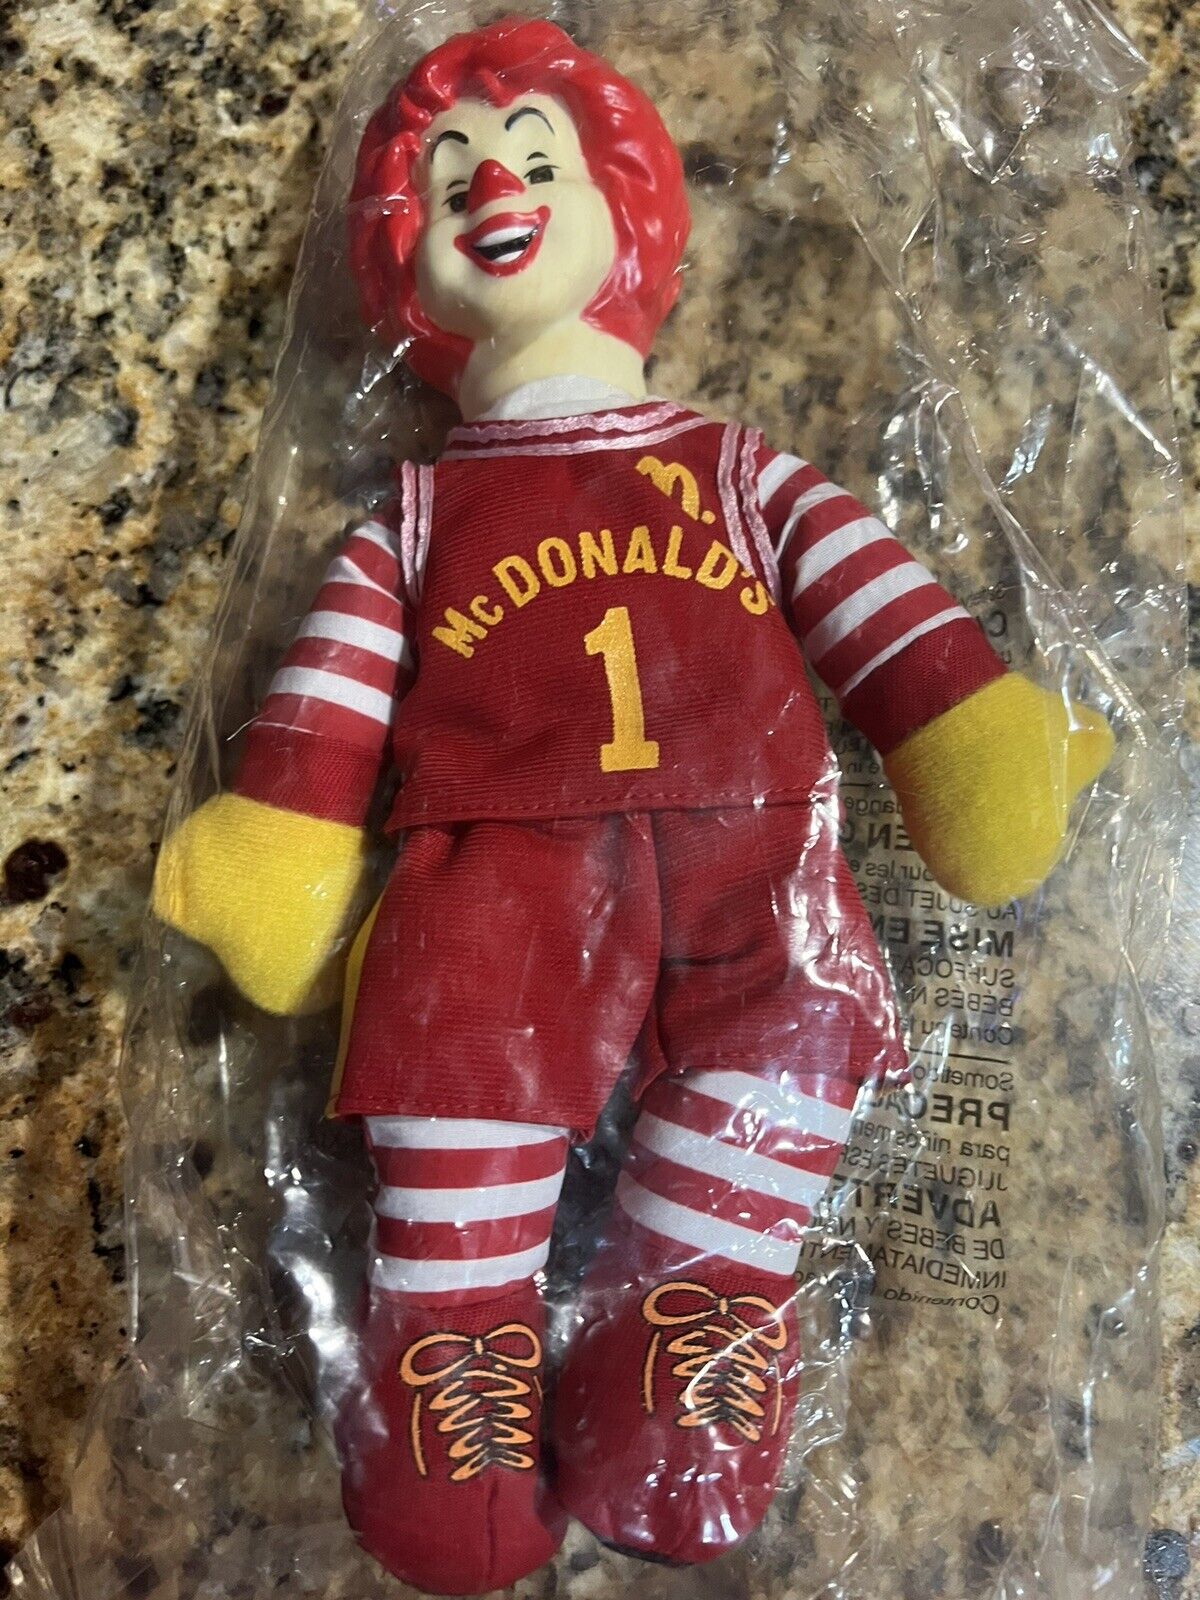 Ronald McDonald Vintage 10” Doll with Vinyl Head. In Original Packaging. New